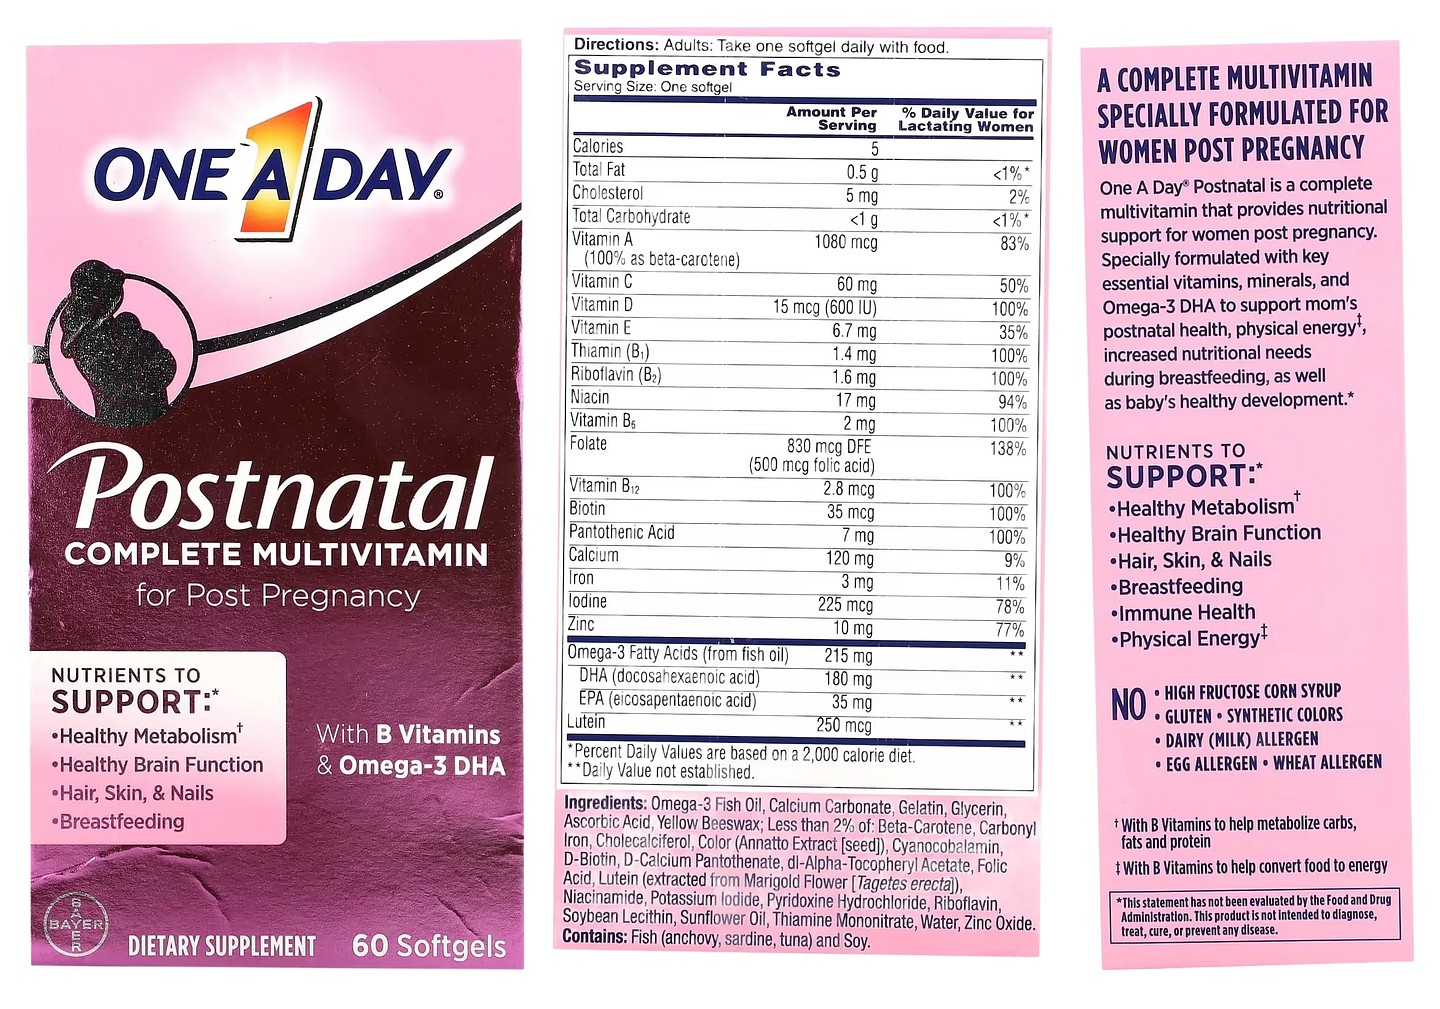 One-A-Day, Postnatal Complete Multivitamin packaging